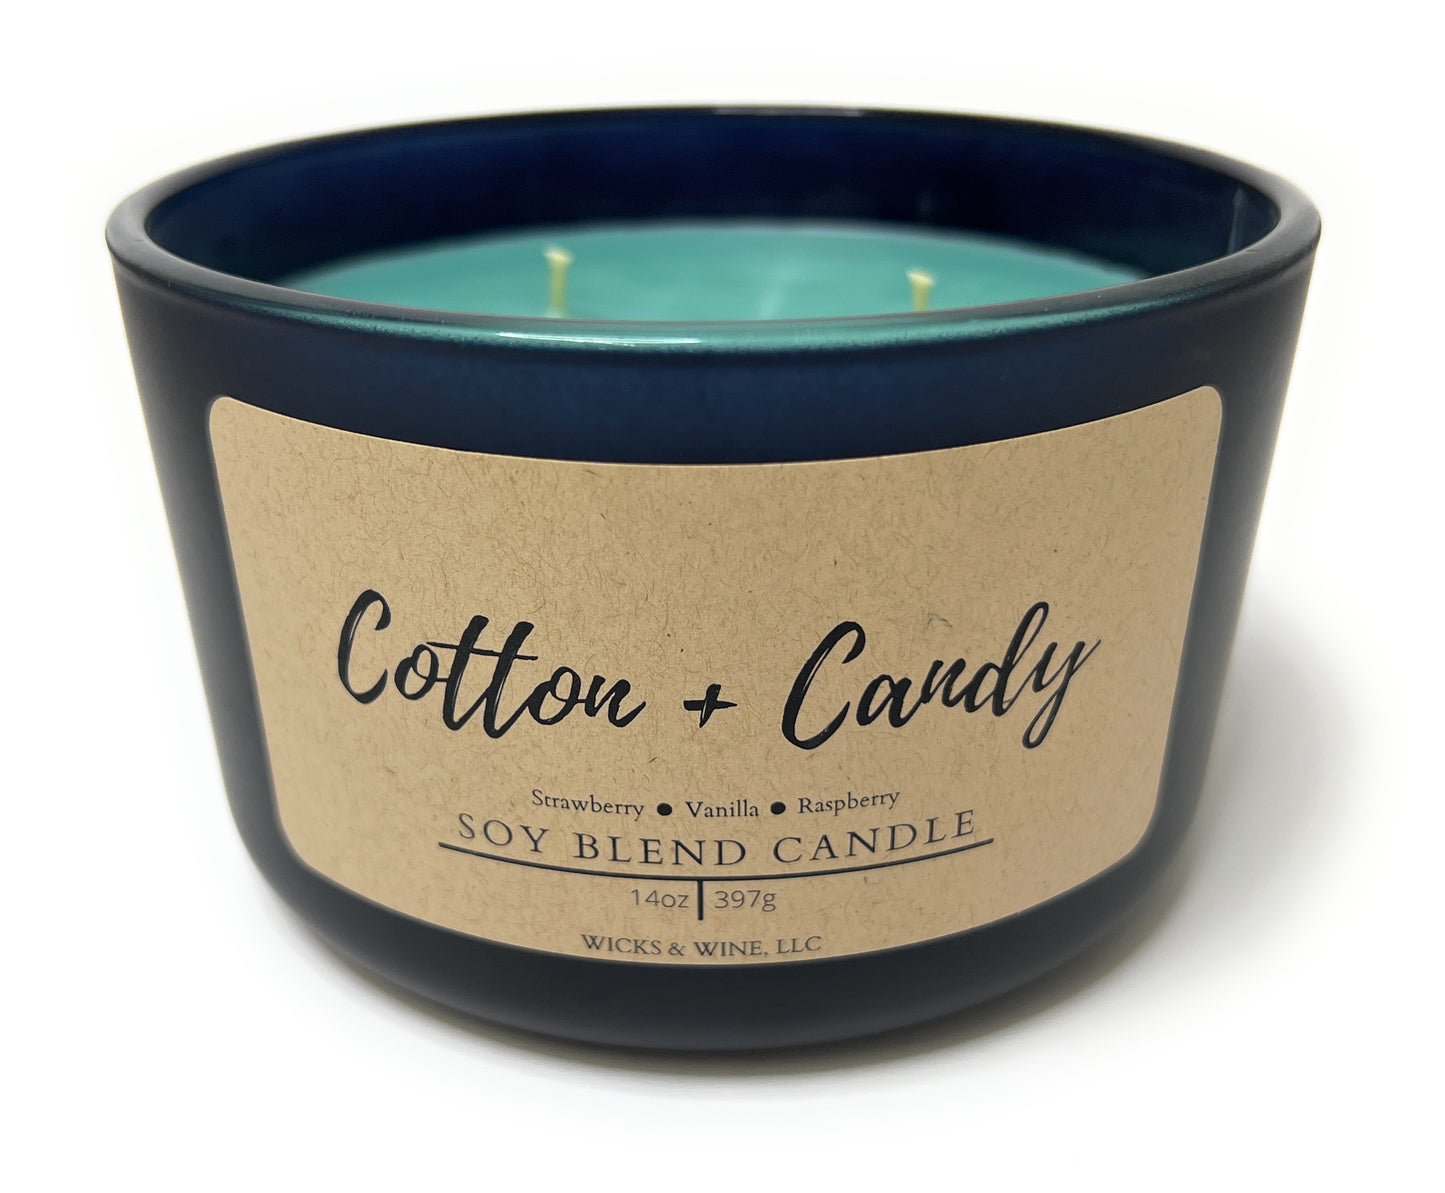 Cotton + Candy 3 Wick Candle